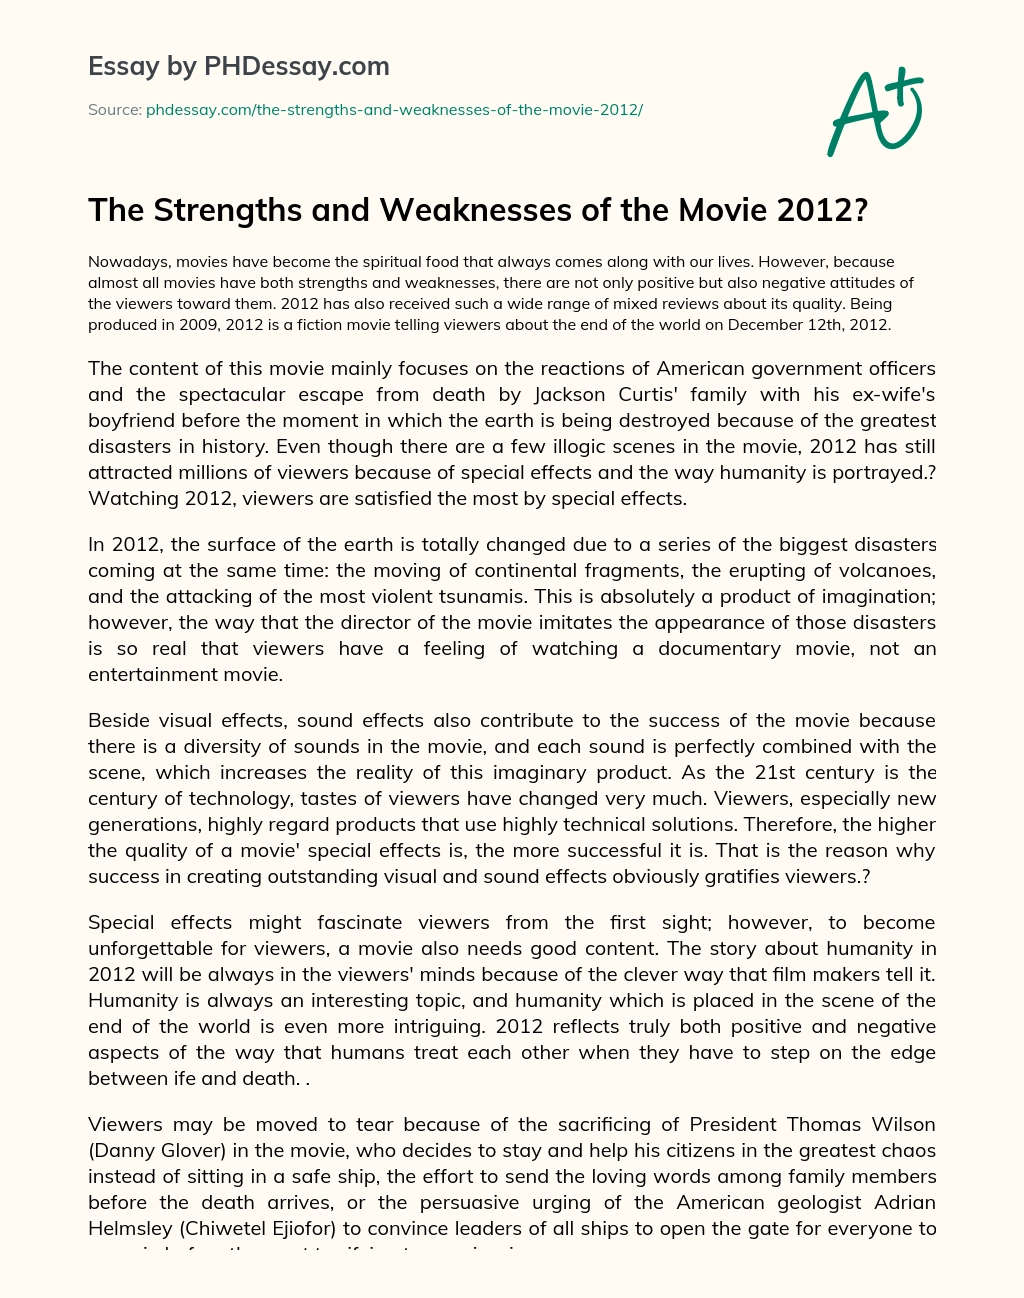 The Strengths and Weaknesses of the Movie 2012? essay